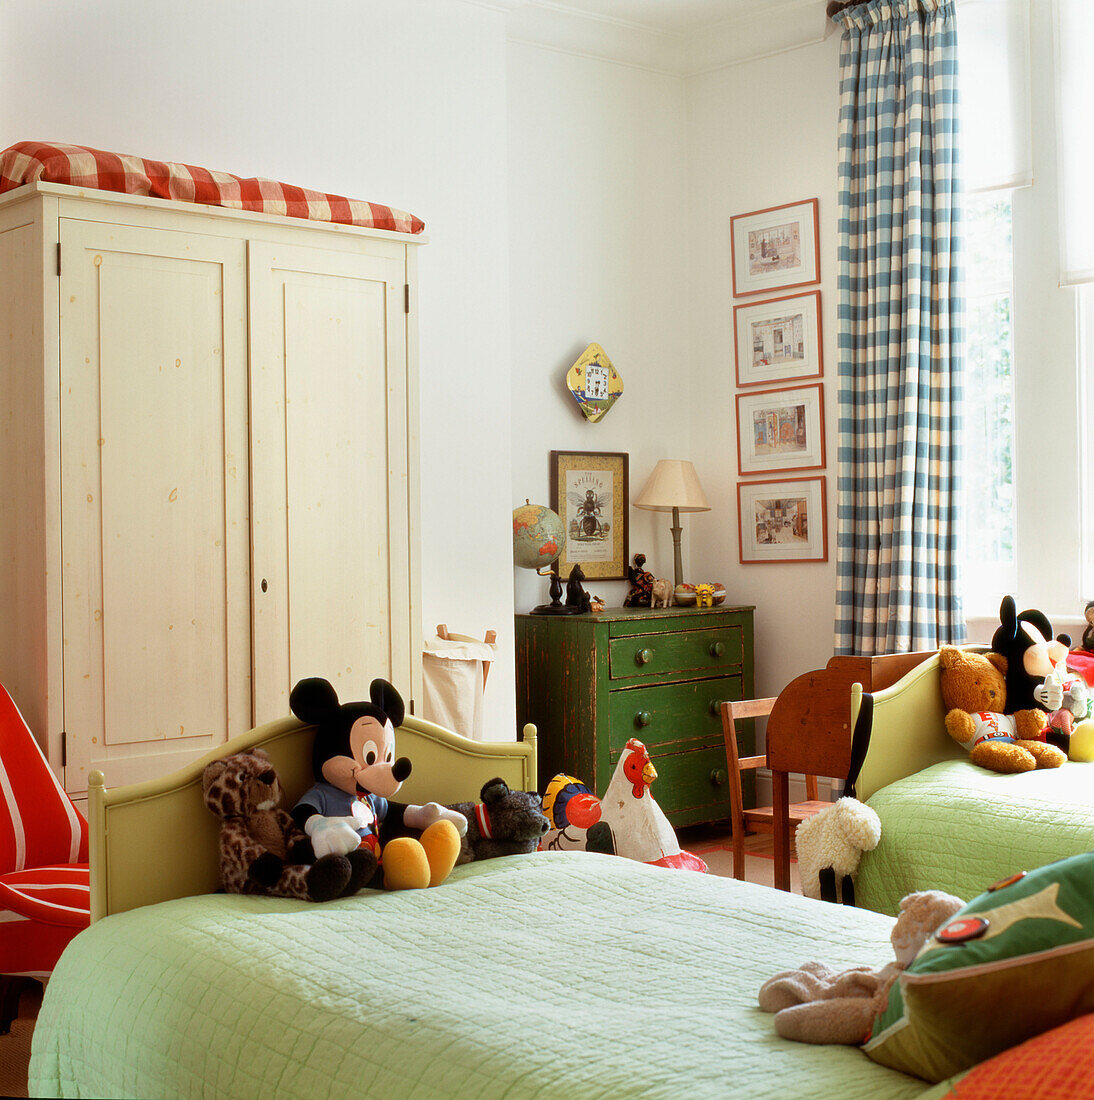 Children's bedroom with painted wooden furniture and toys